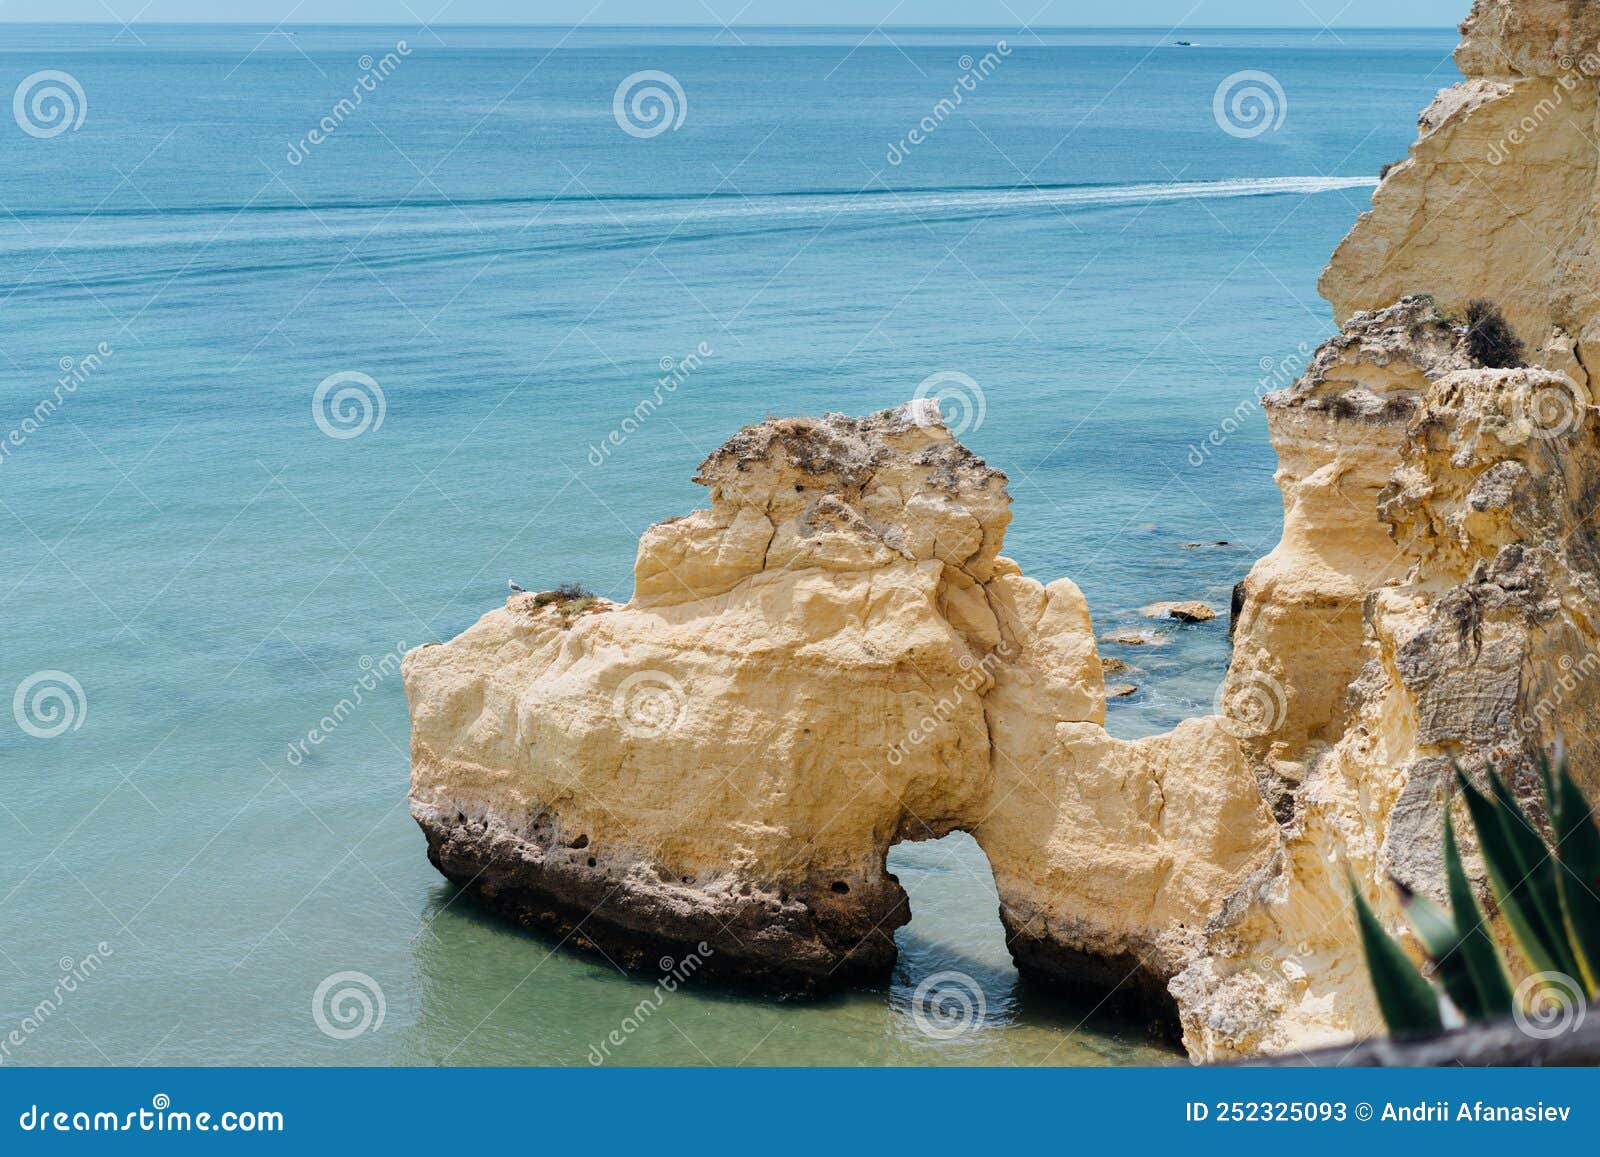 The Rocky Cliffs Of Vale Do Olival Beach In Armacao De Pera Portugal Stock Image Image Of